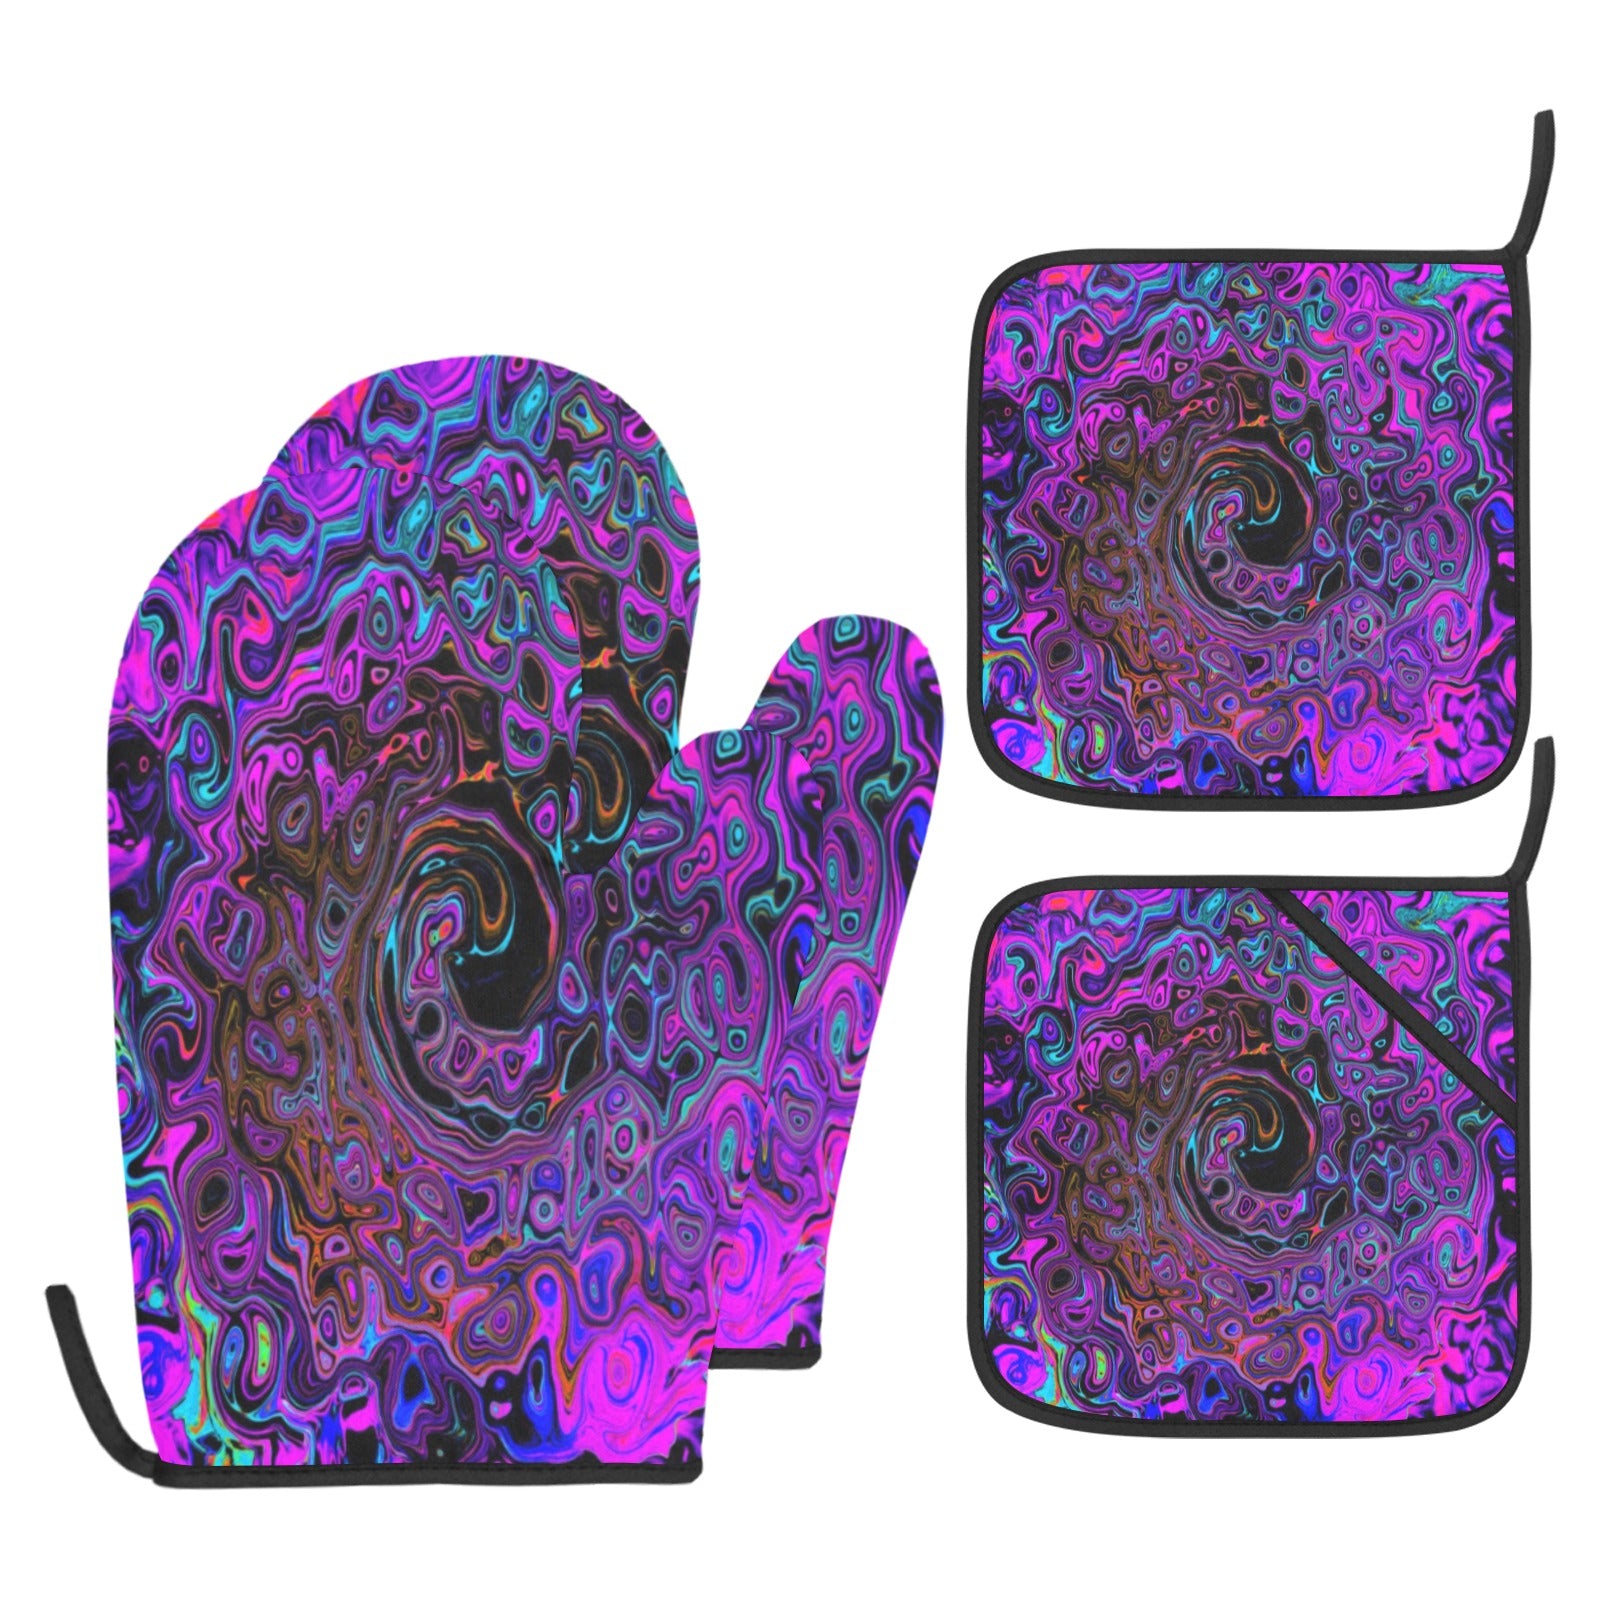 Oven Mitts and Pot Holders Set, Trippy Black and Magenta Retro